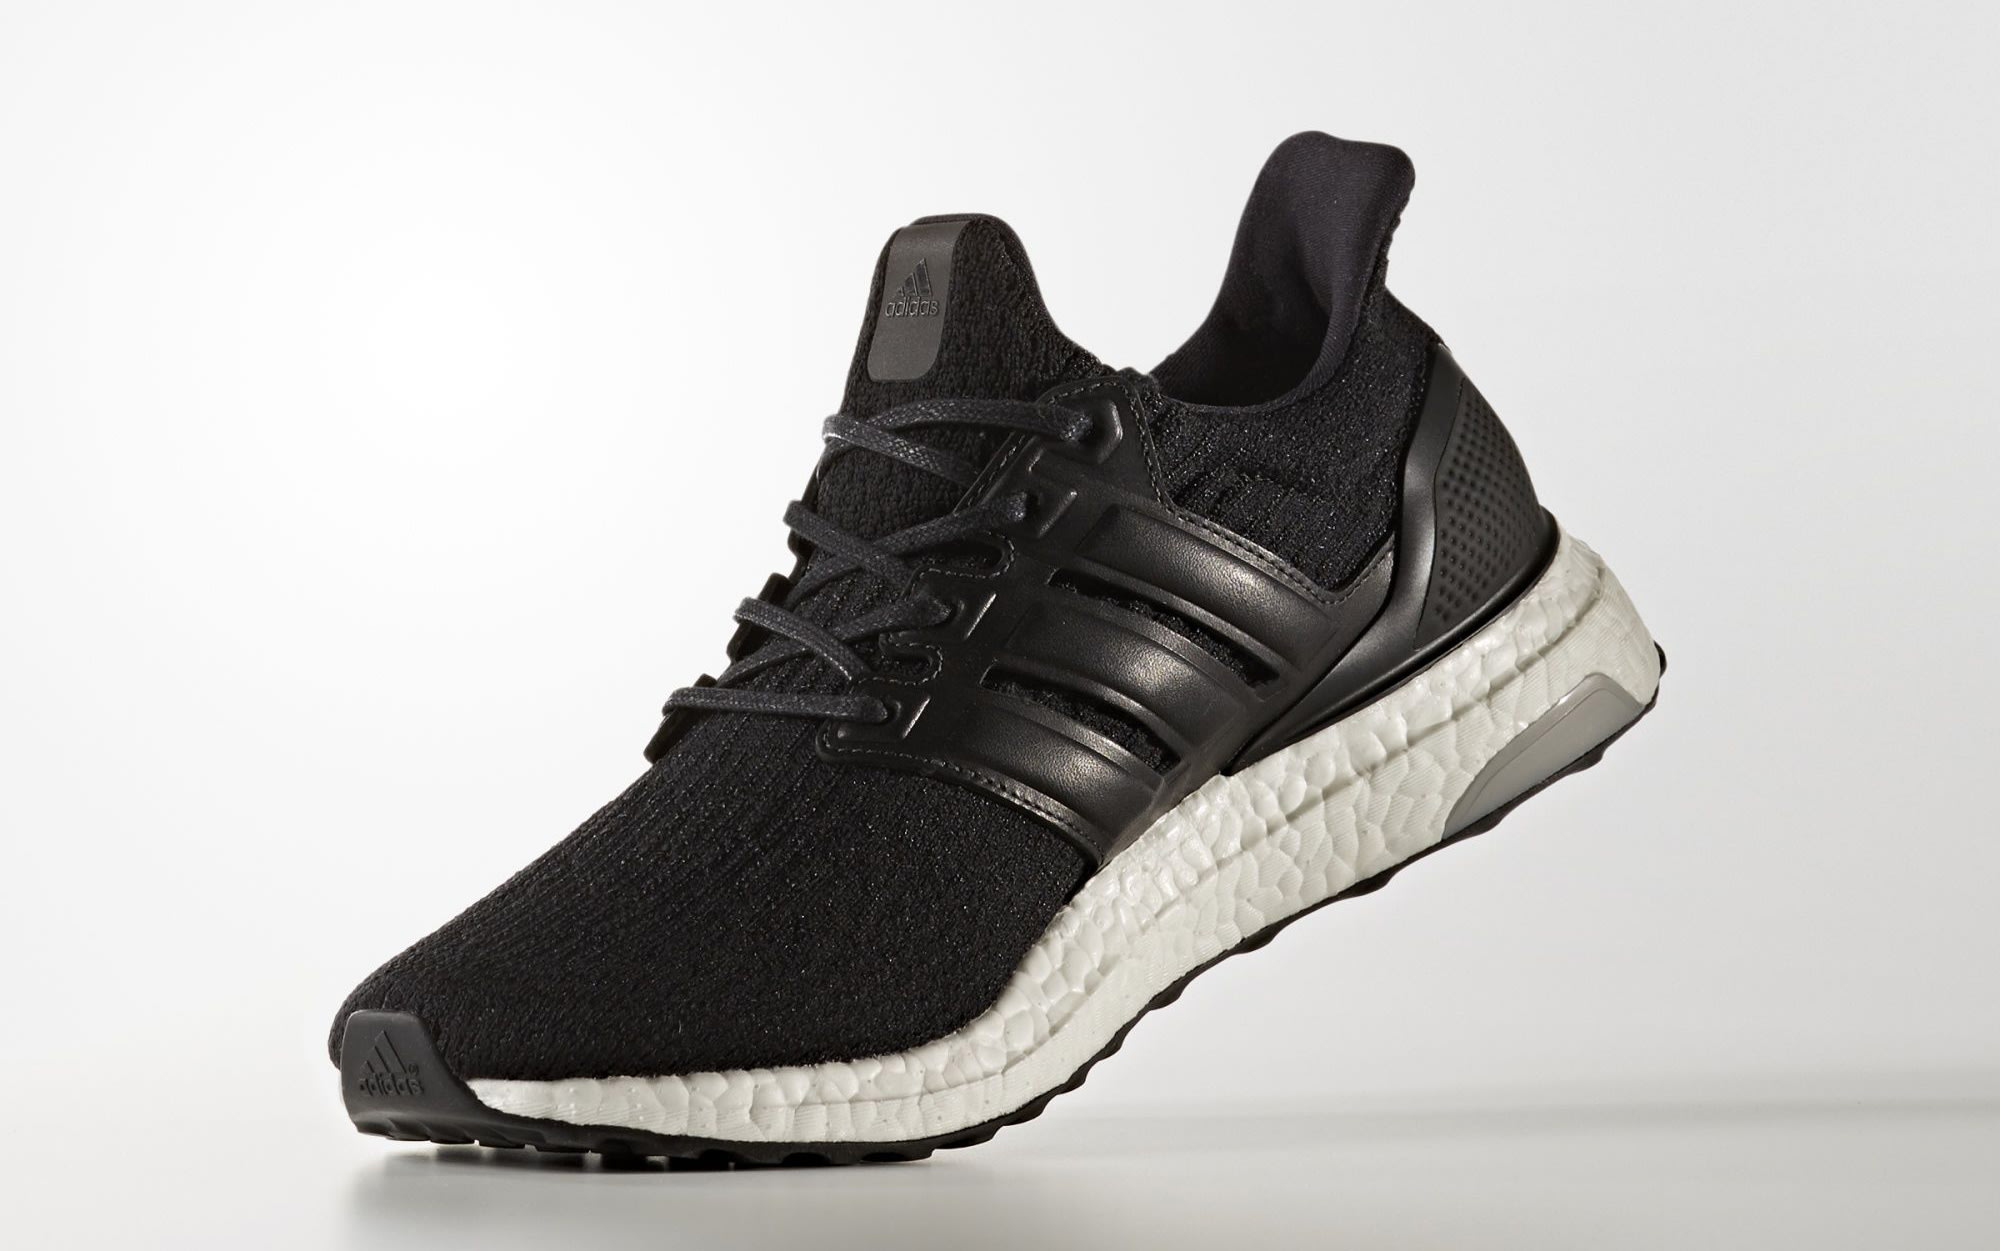 Black Adidas Ultra Boost Leather Cage BA8924 Medial